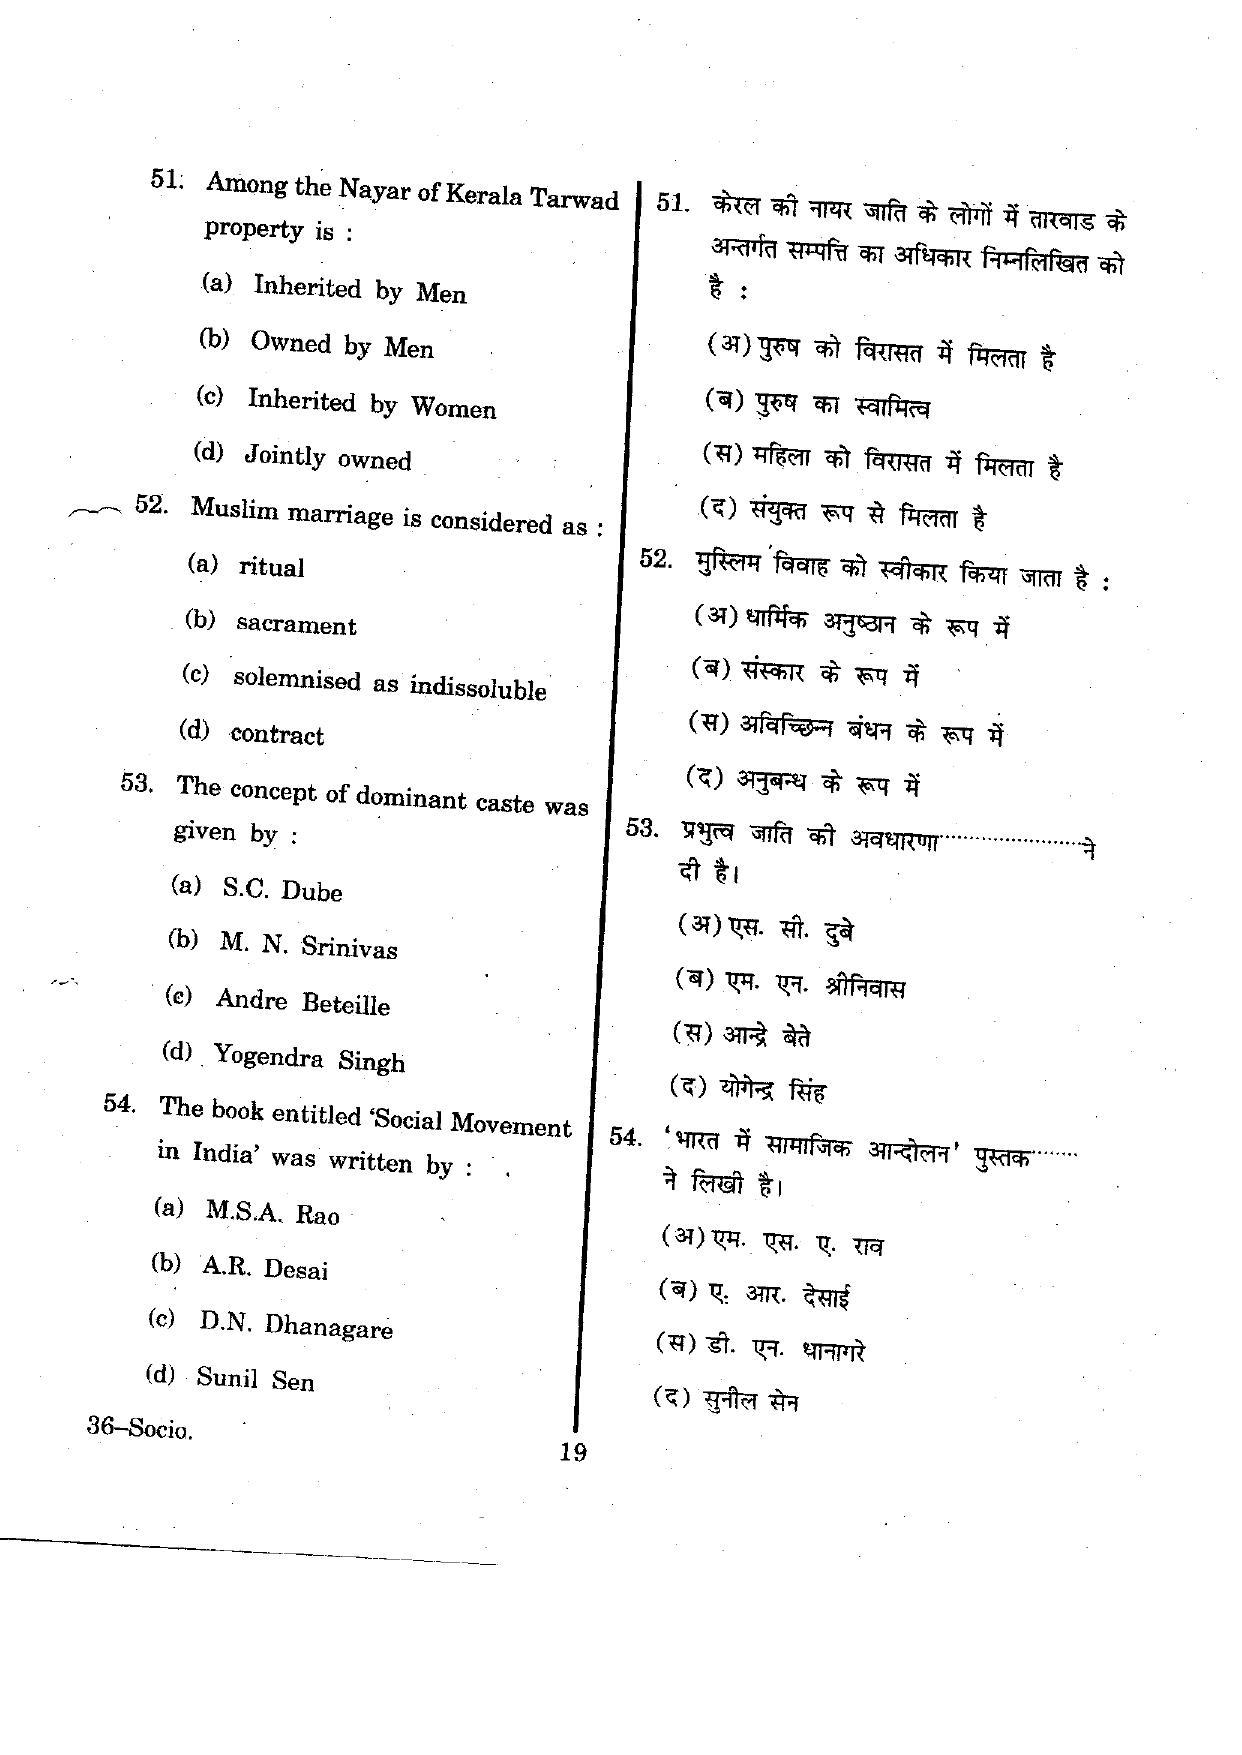 URATPG Sociology 2012 Question Paper - Page 19